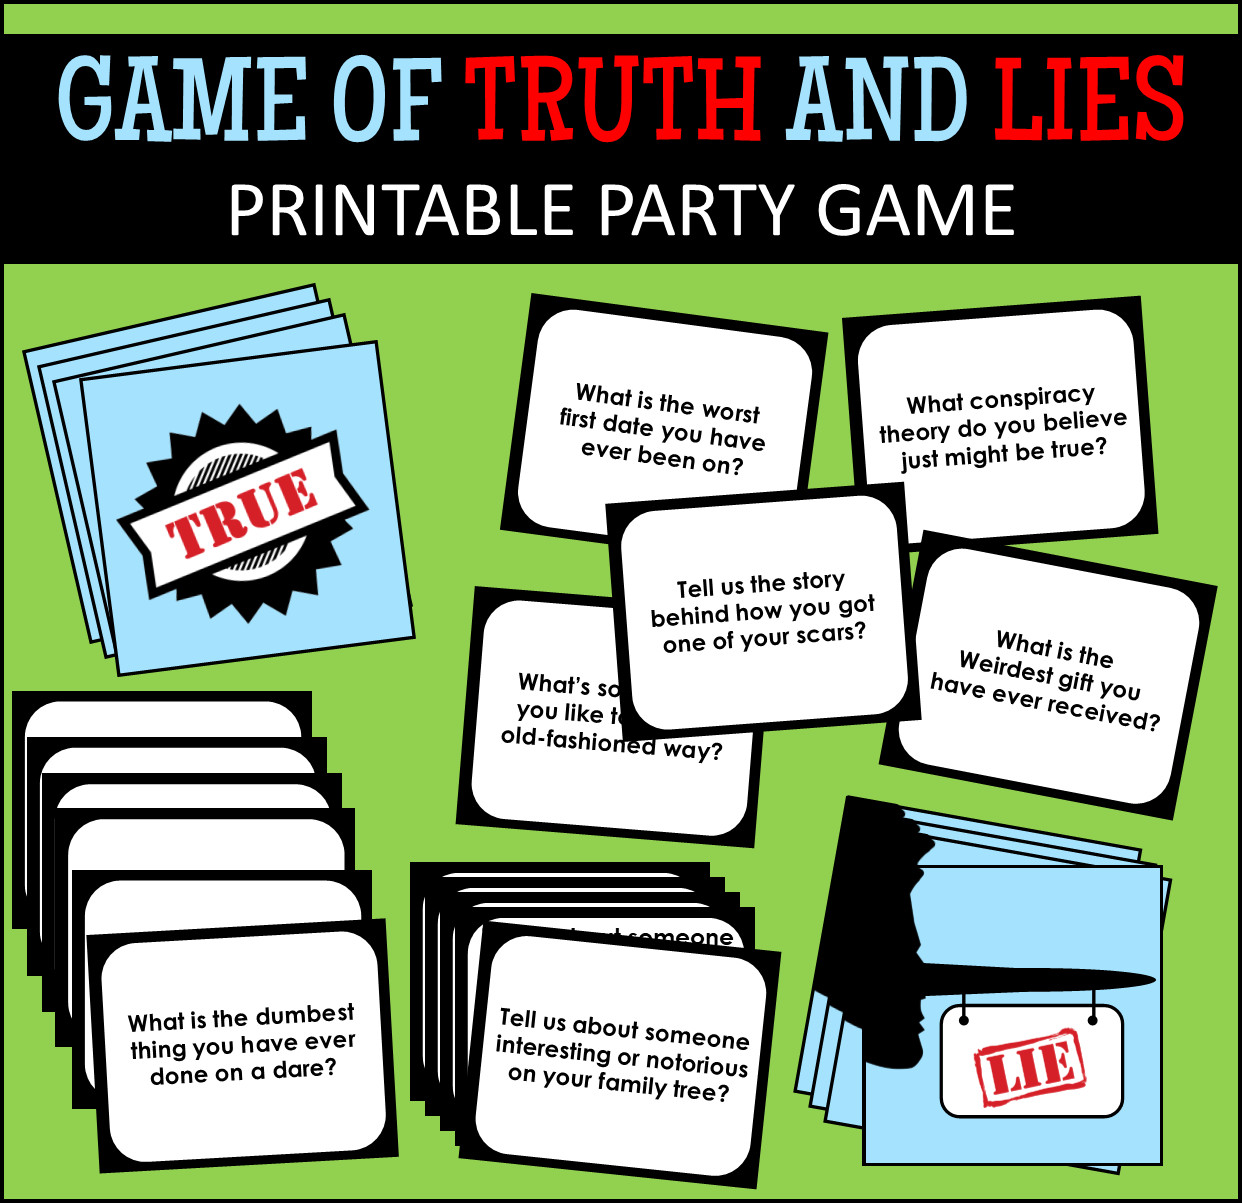 Dinner Party Game Ideas
 Top Adult Dinner Party Games to Liven Up Your Next Dinner